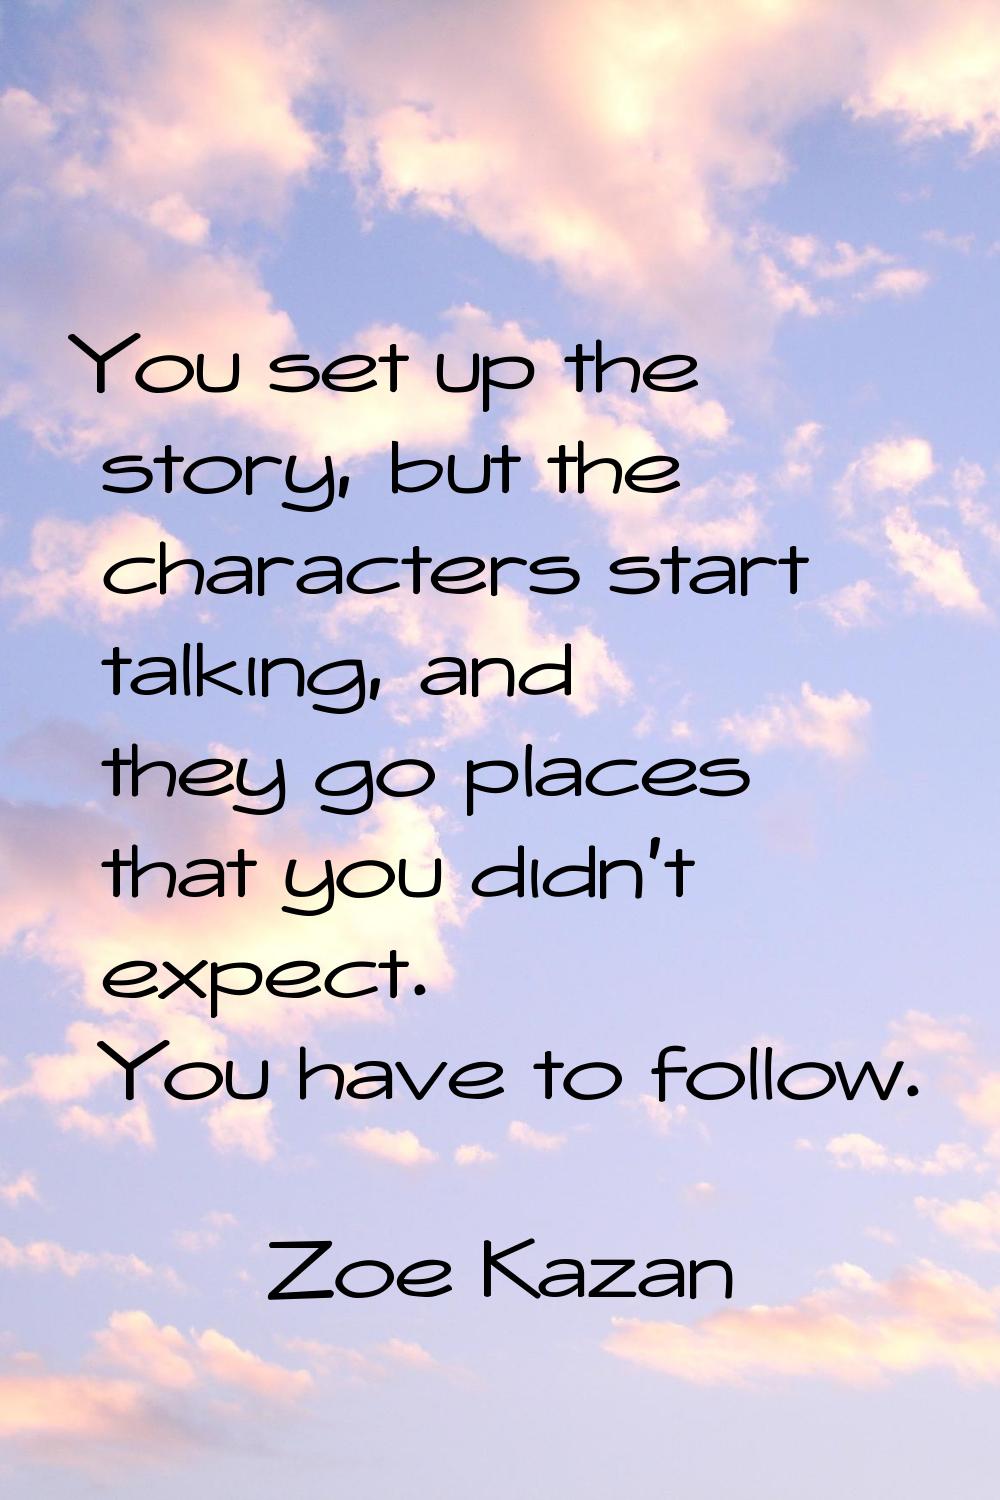 You set up the story, but the characters start talking, and they go places that you didn't expect. 